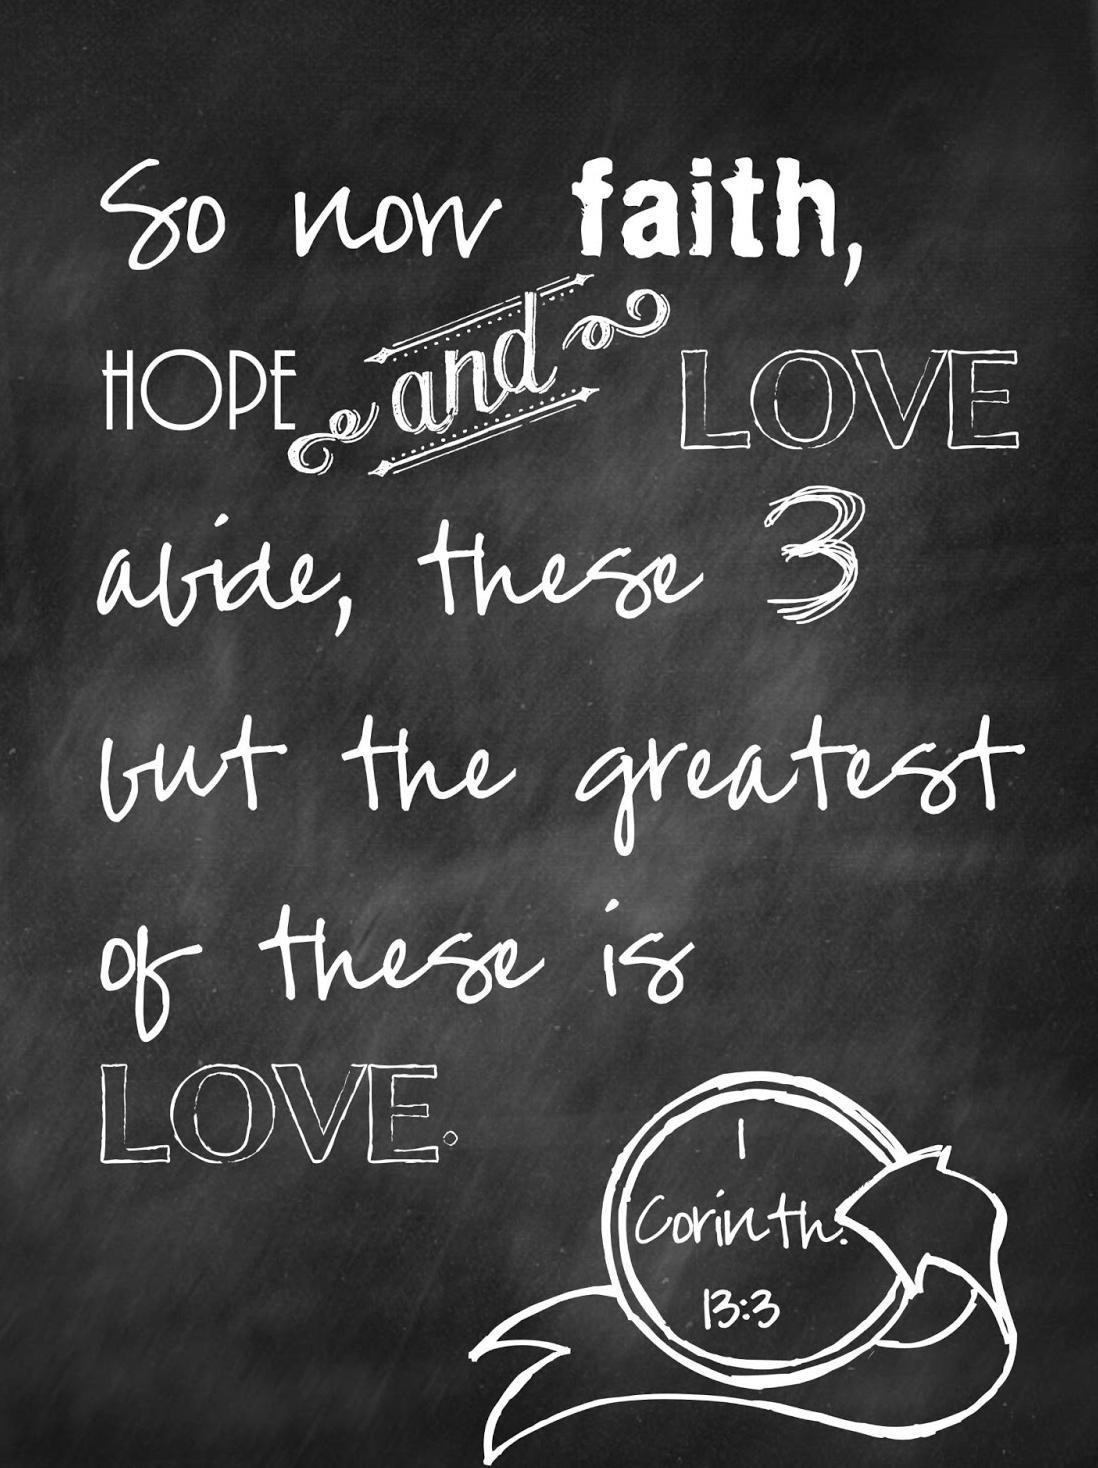 So now faith, hope and love abide, these 3 but the greatest of these is love.